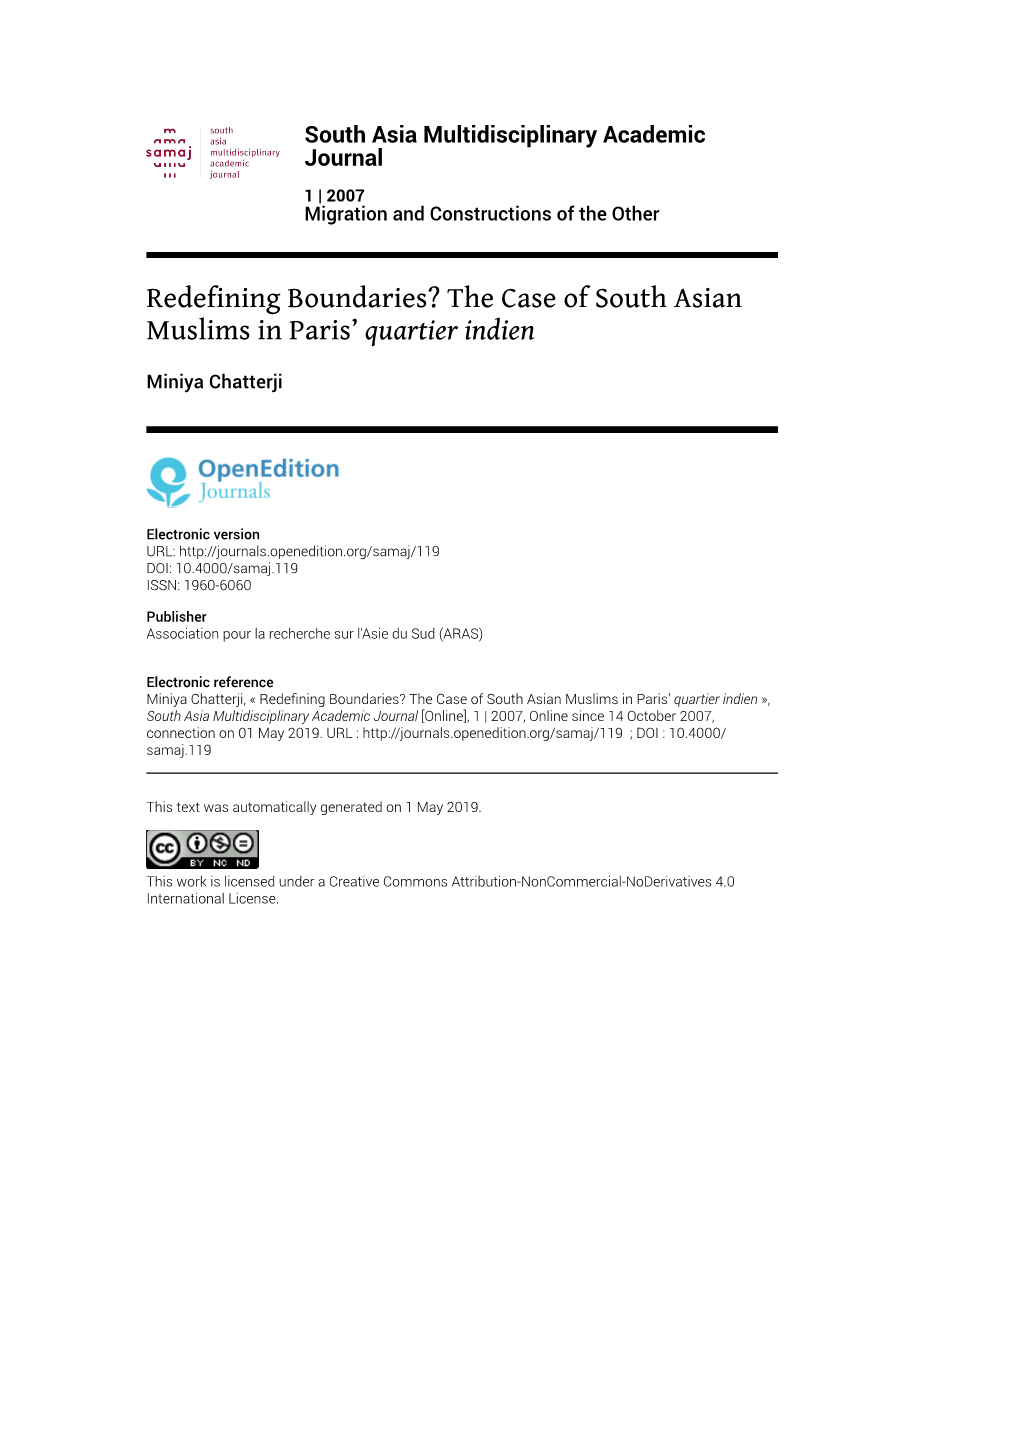 South Asia Multidisciplinary Academic Journal, 1 | 2007 Redefining Boundaries? the Case of South Asian Muslims in Paris’ Quartier Indien 2